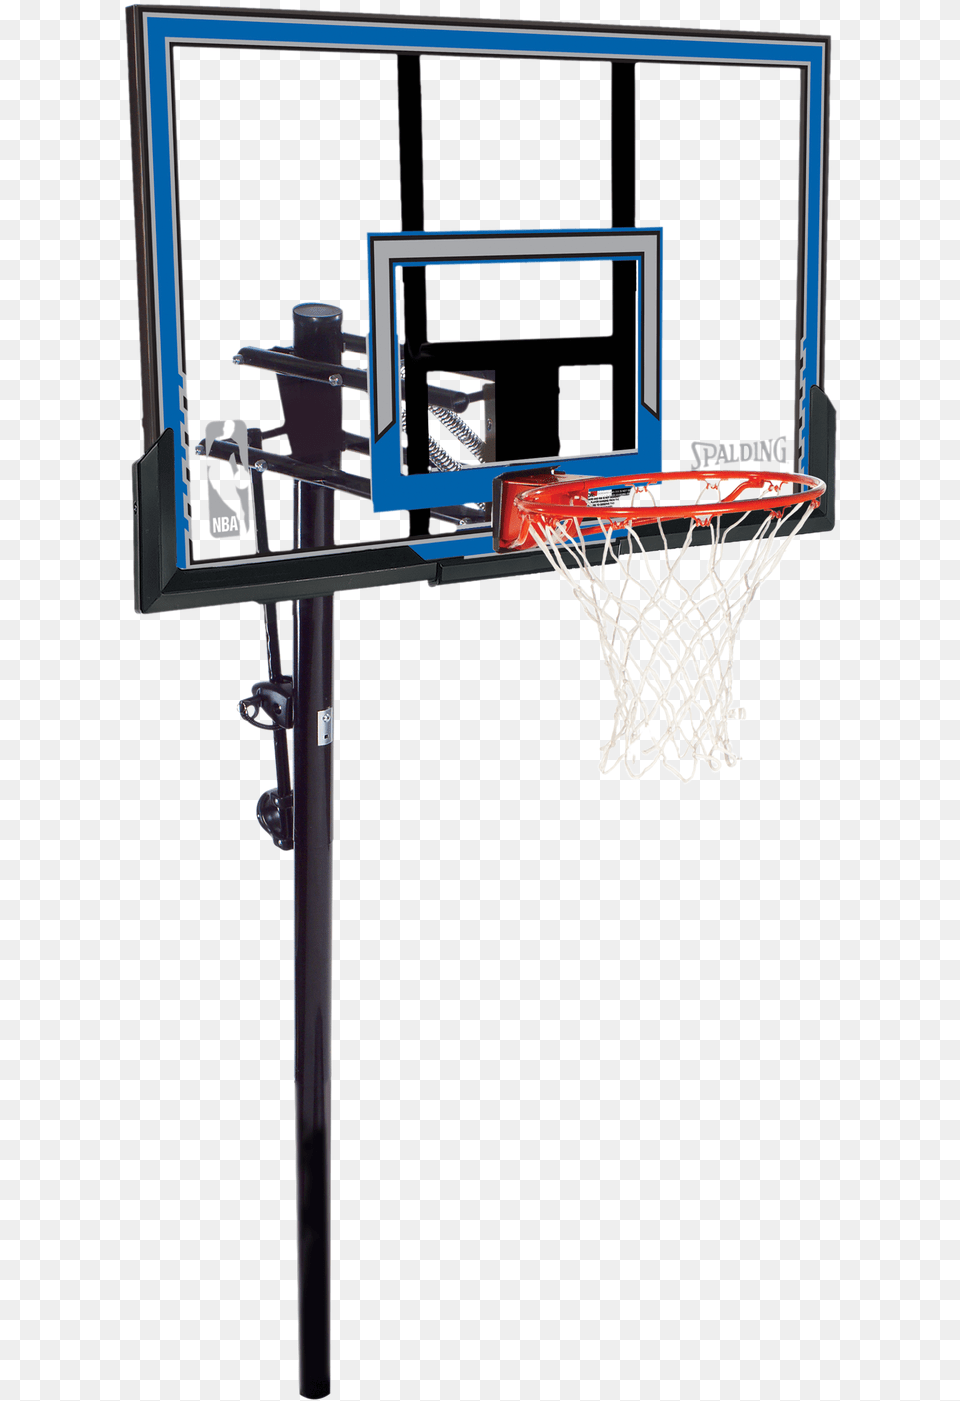 Spalding 50 Polycarbonate In Ground Basketball Hoop Streetball Png